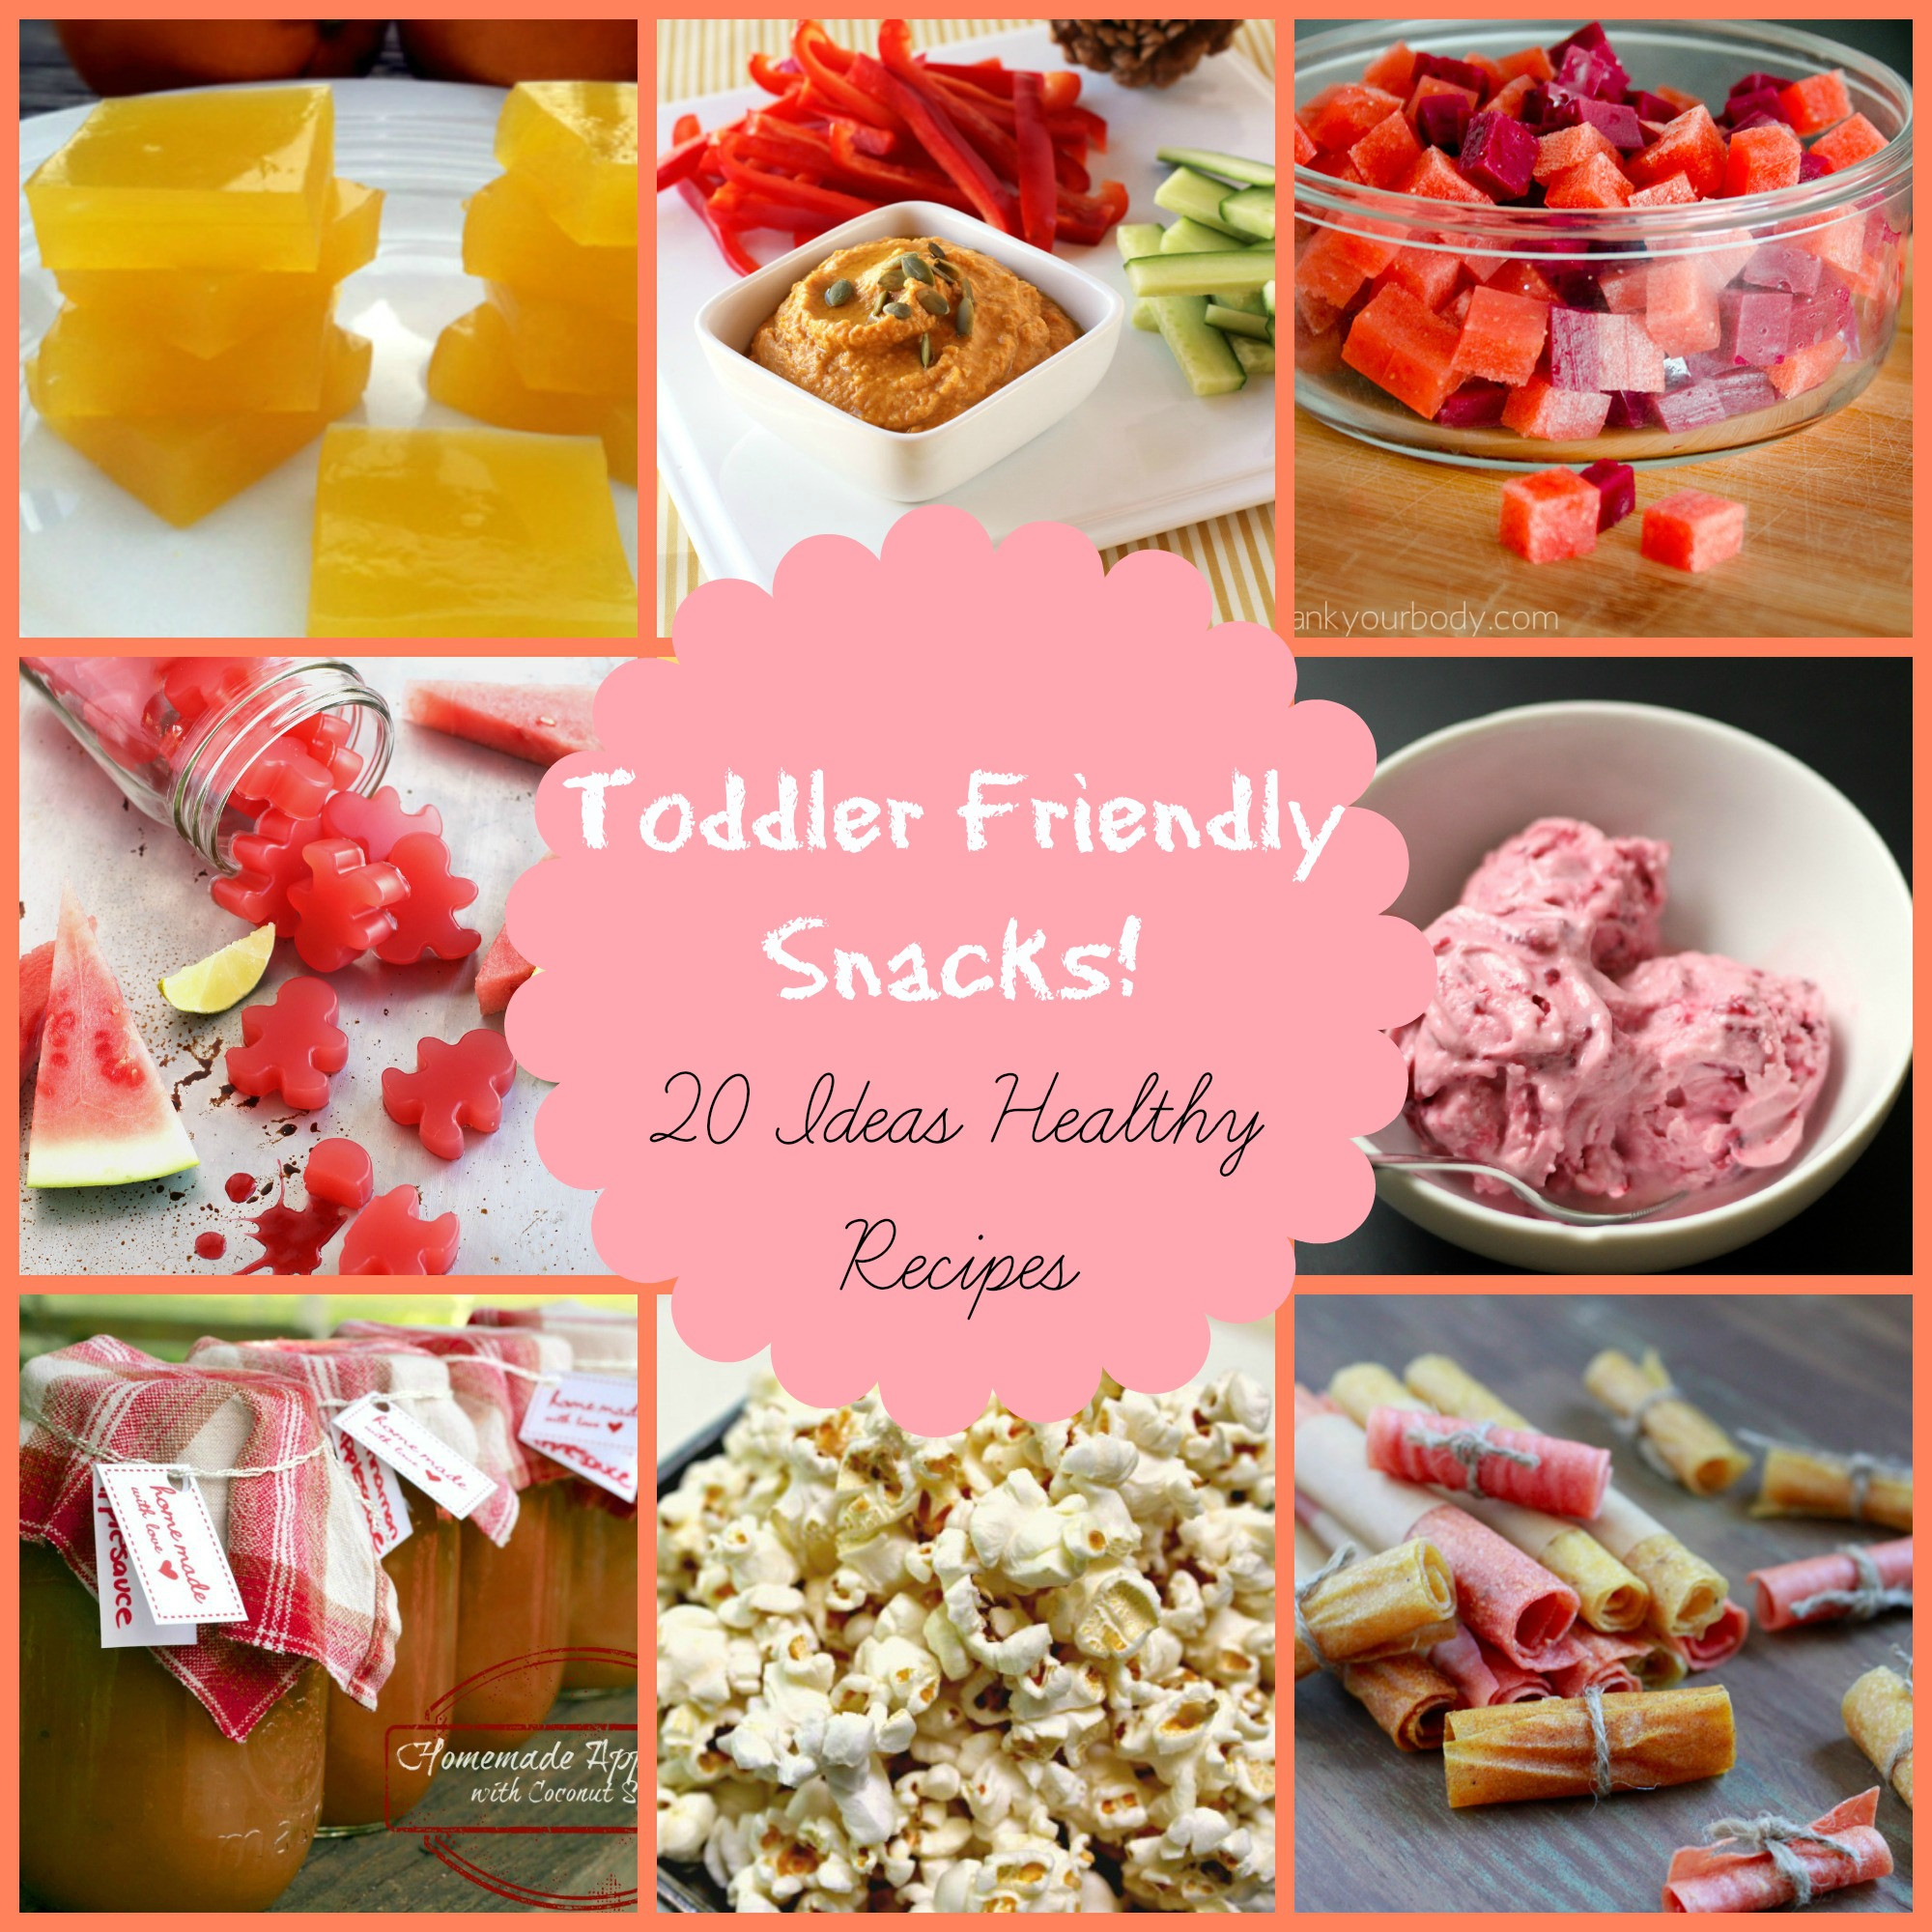 Healthy Snacks For Toddlers And Preschoolers
 Healthy Snacks for Kids 20 toddler friendly ideas